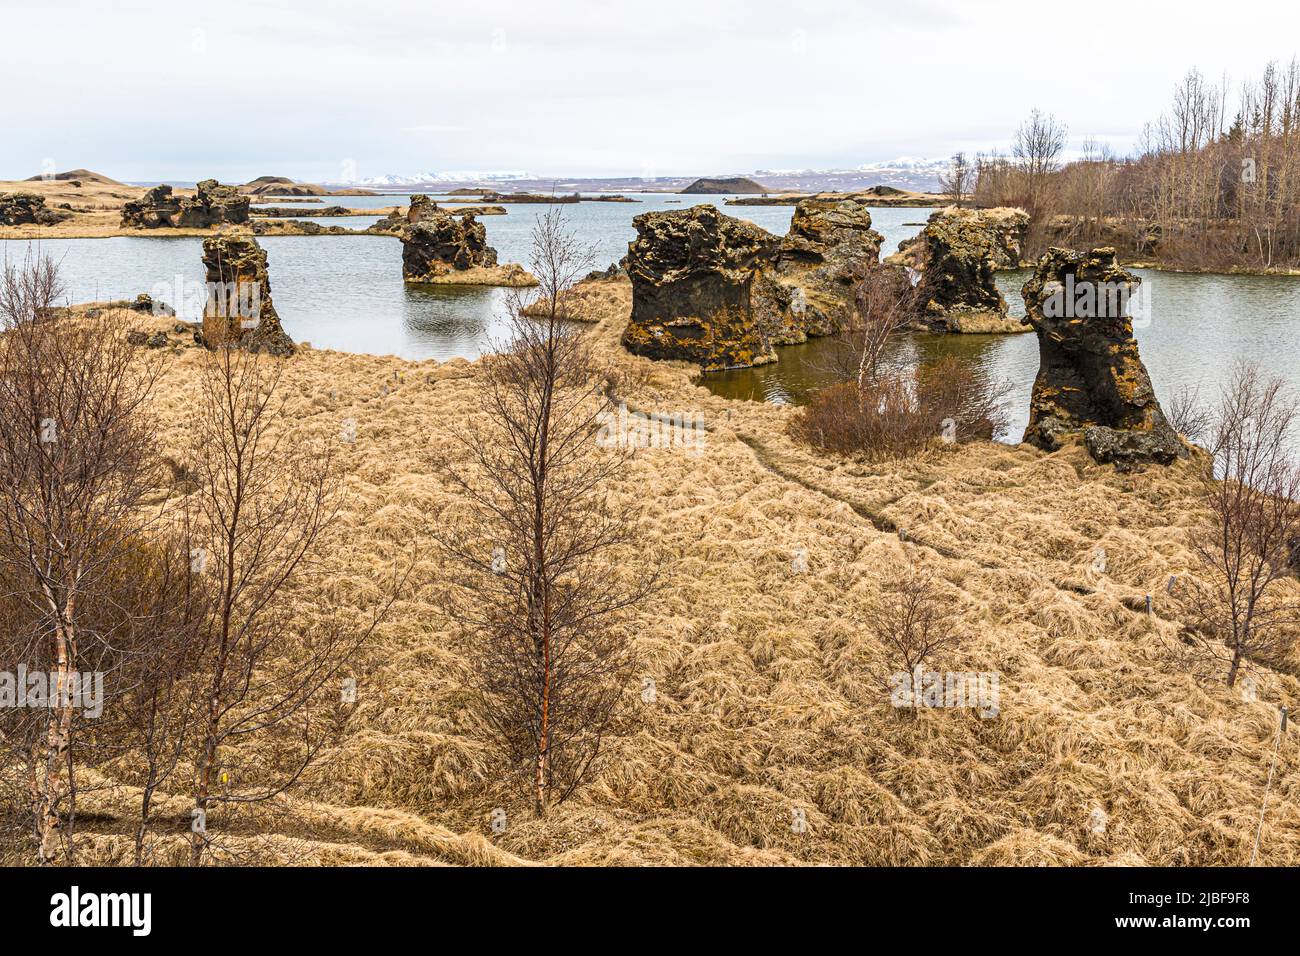 Rock formations (Guð fingur) in the Skutustadhir area of Lake Myvatn, Iceland Stock Photo